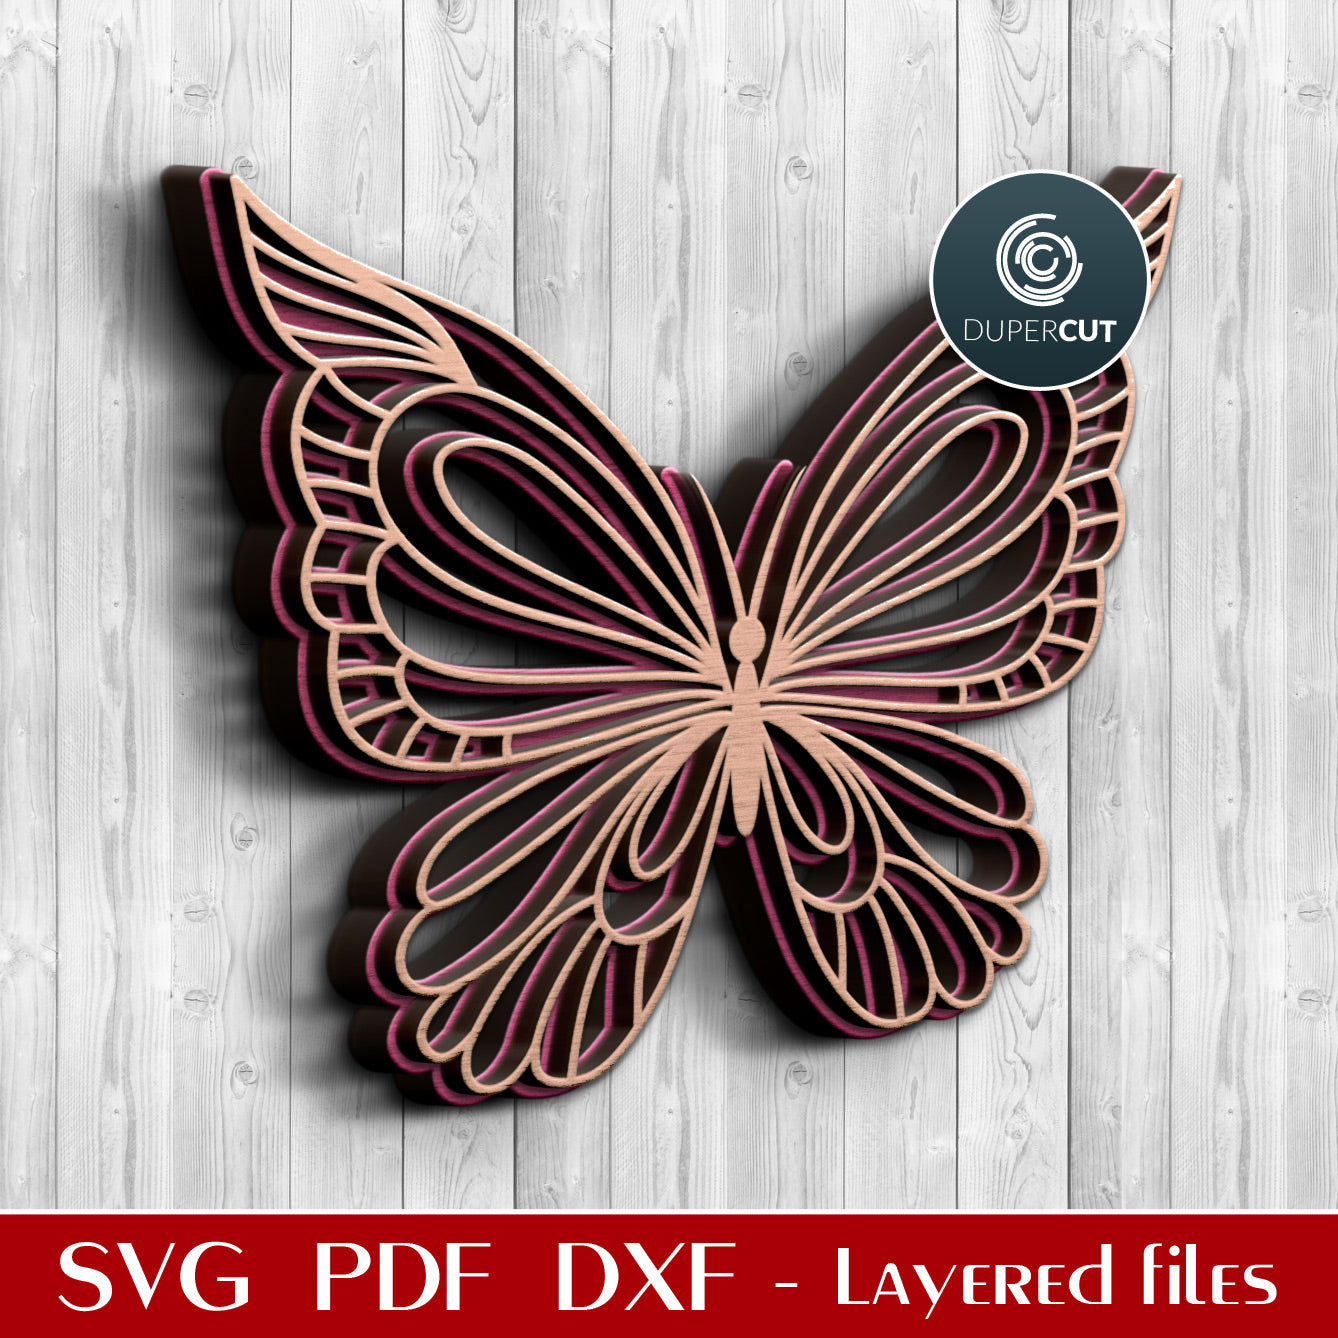 Layered butterfly - laser cutting template - SVG PDF DXF vector files for cutting with Glowforge, Cricut, Silhouette Cameo, CNC plasma machines by DuperCut